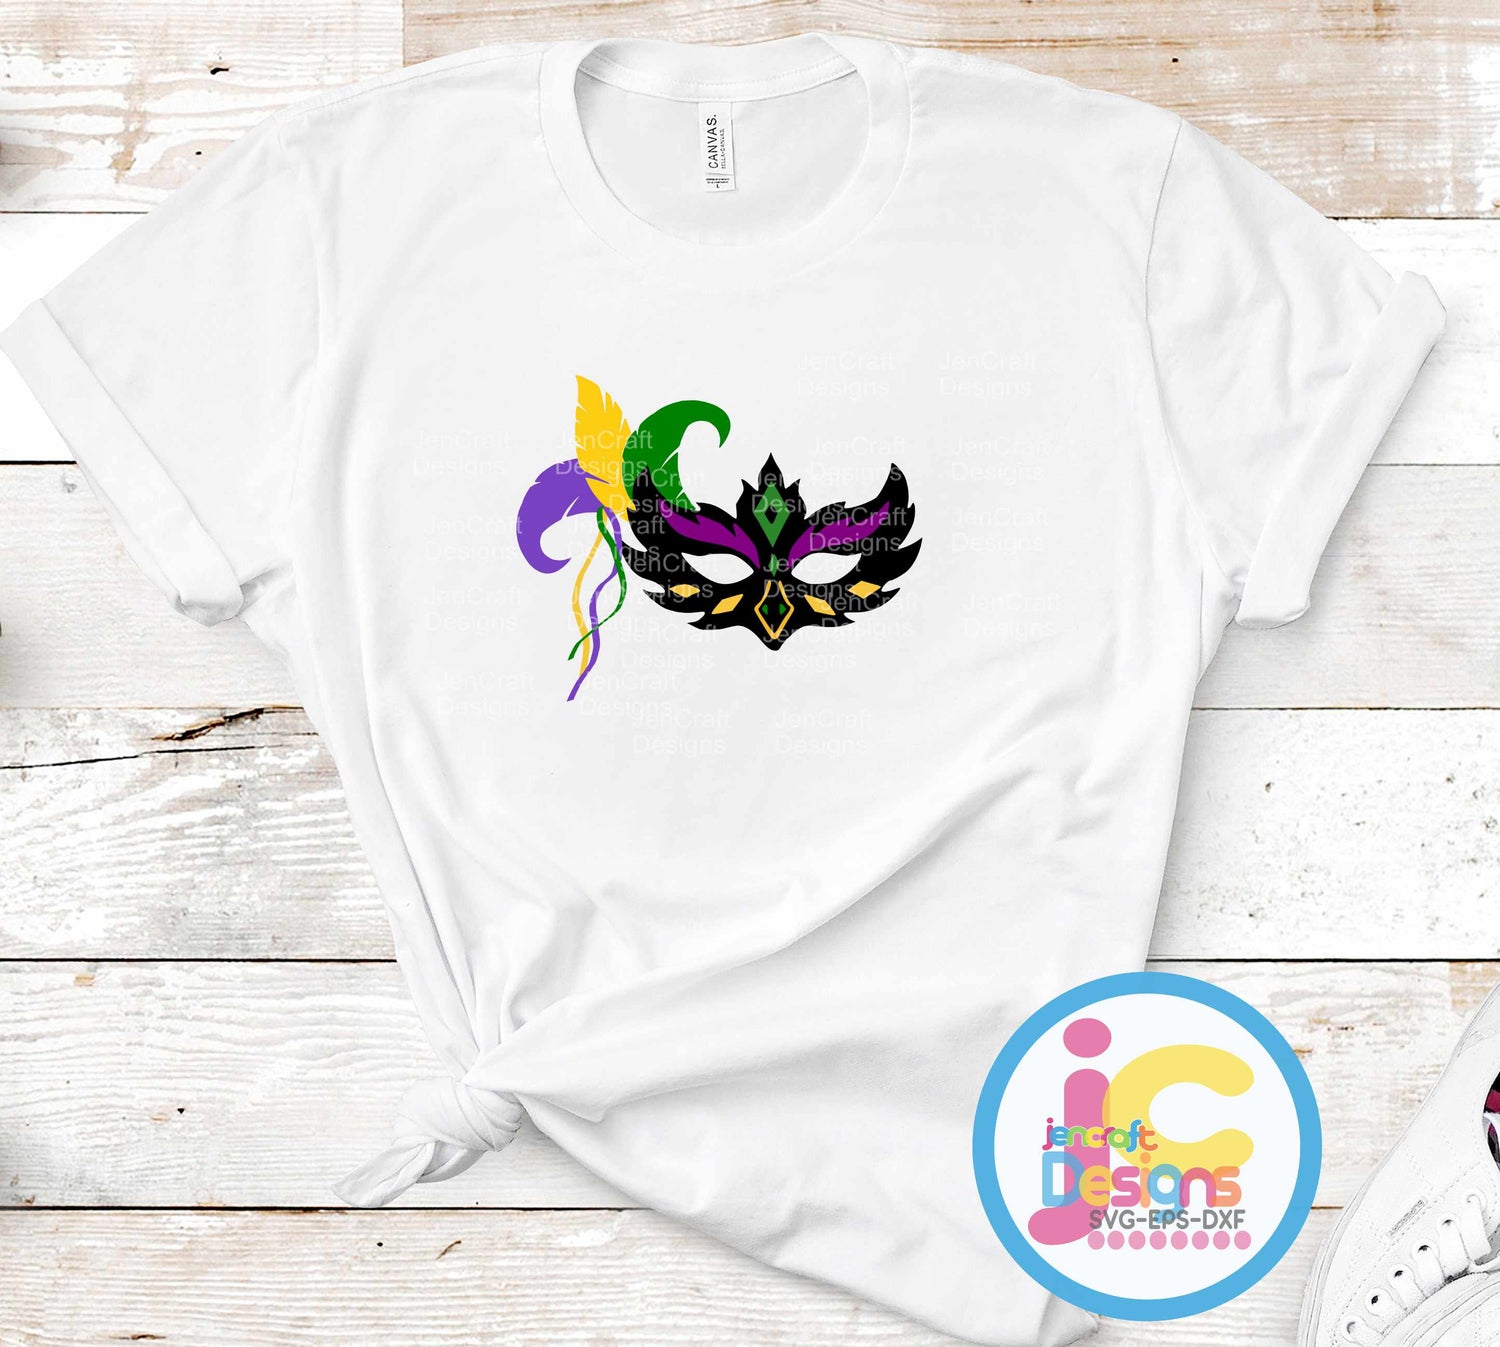 Mardi Gras Designs in SVG, EPS, DXF and PNG